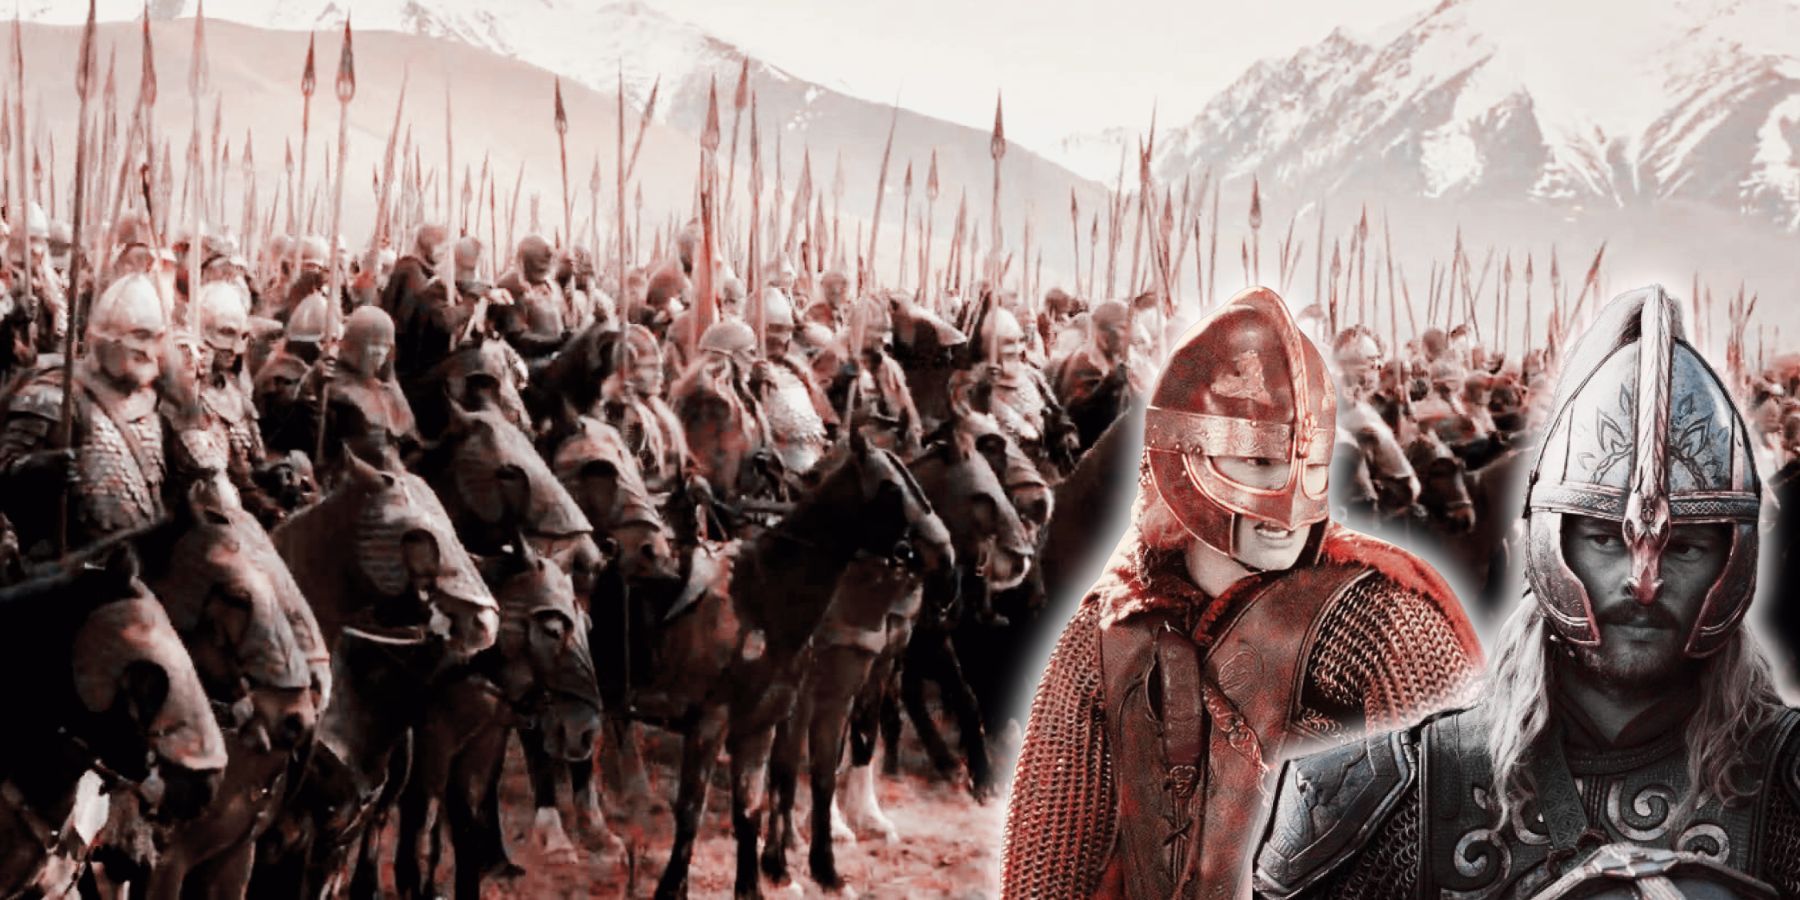 eomer-eowyn-riders-of-rohan-lotr-lord-of-the-rings-two-towers